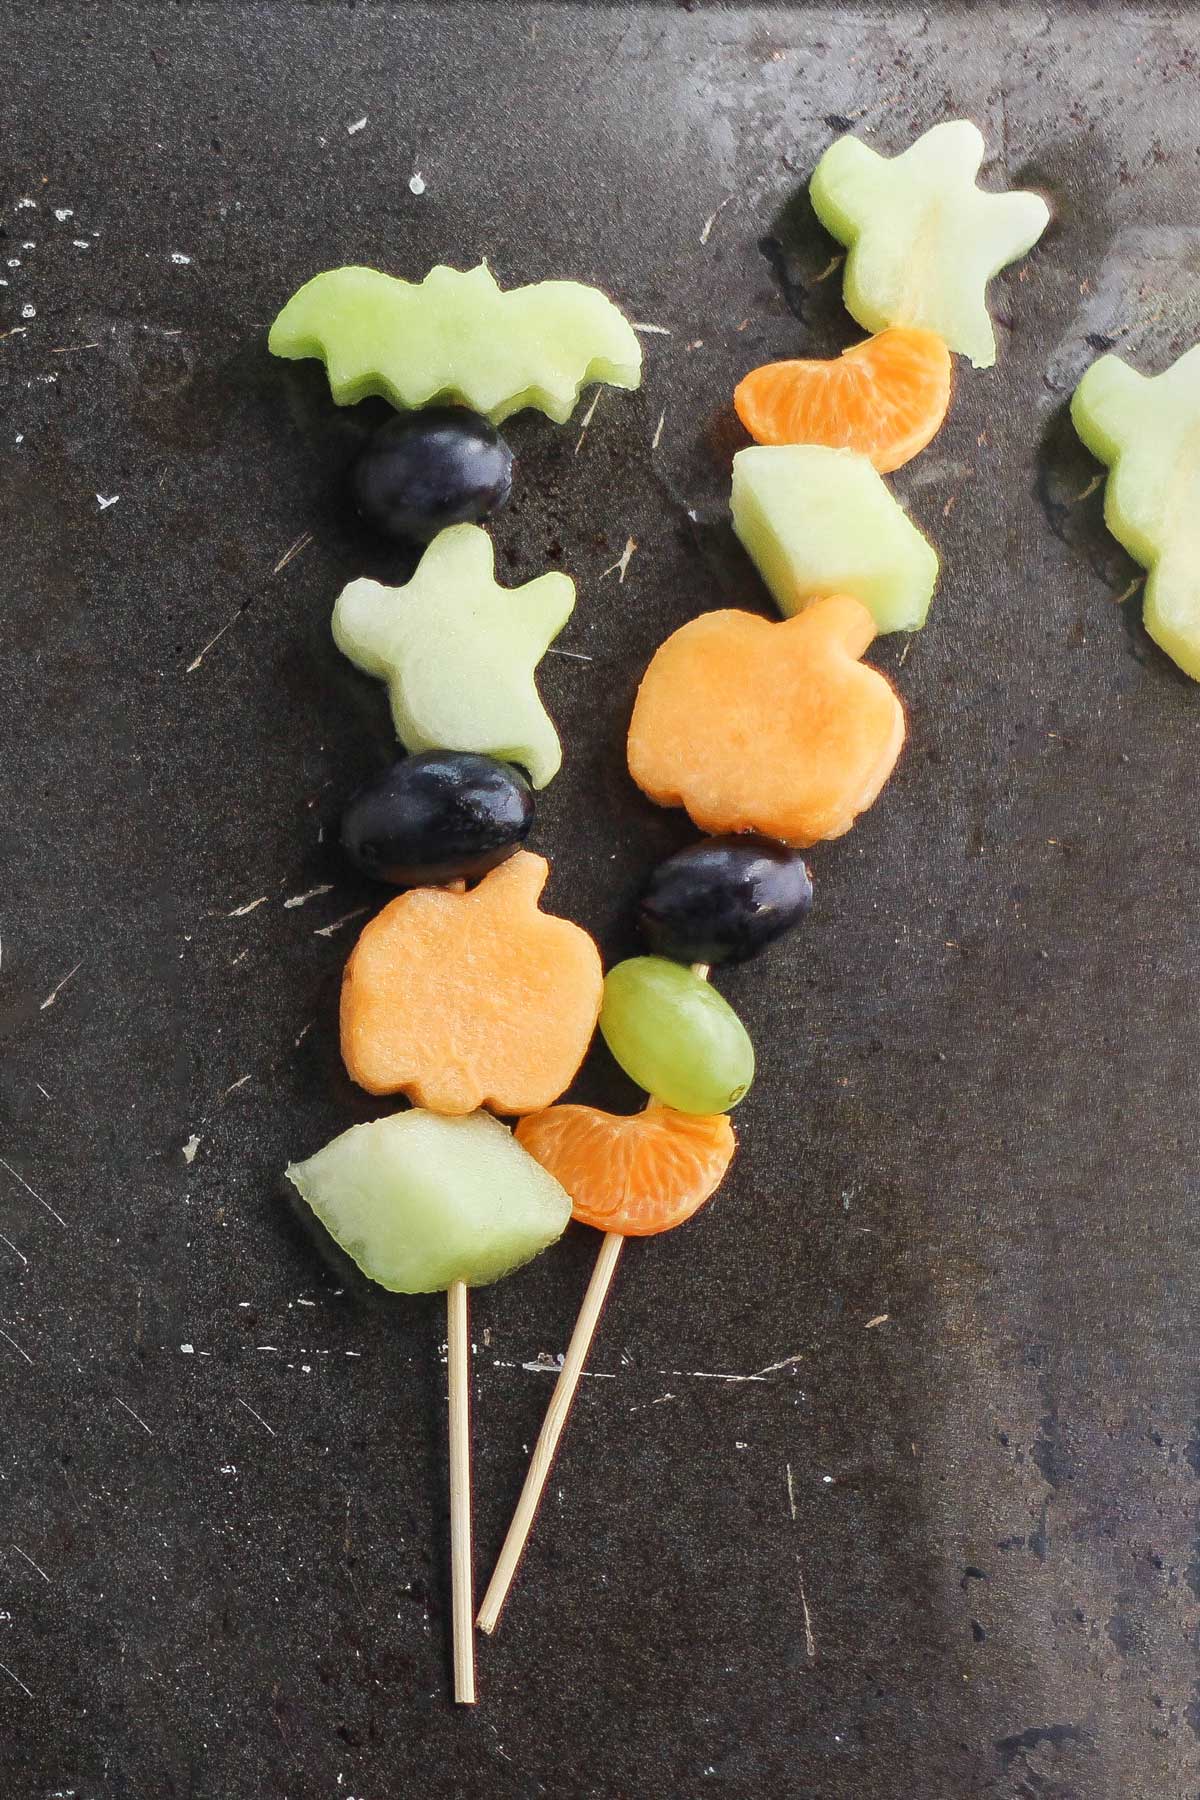 2 kabobs with fruit chunks and also cutout fruit shapes of a bat, pumpkins and ghosts.